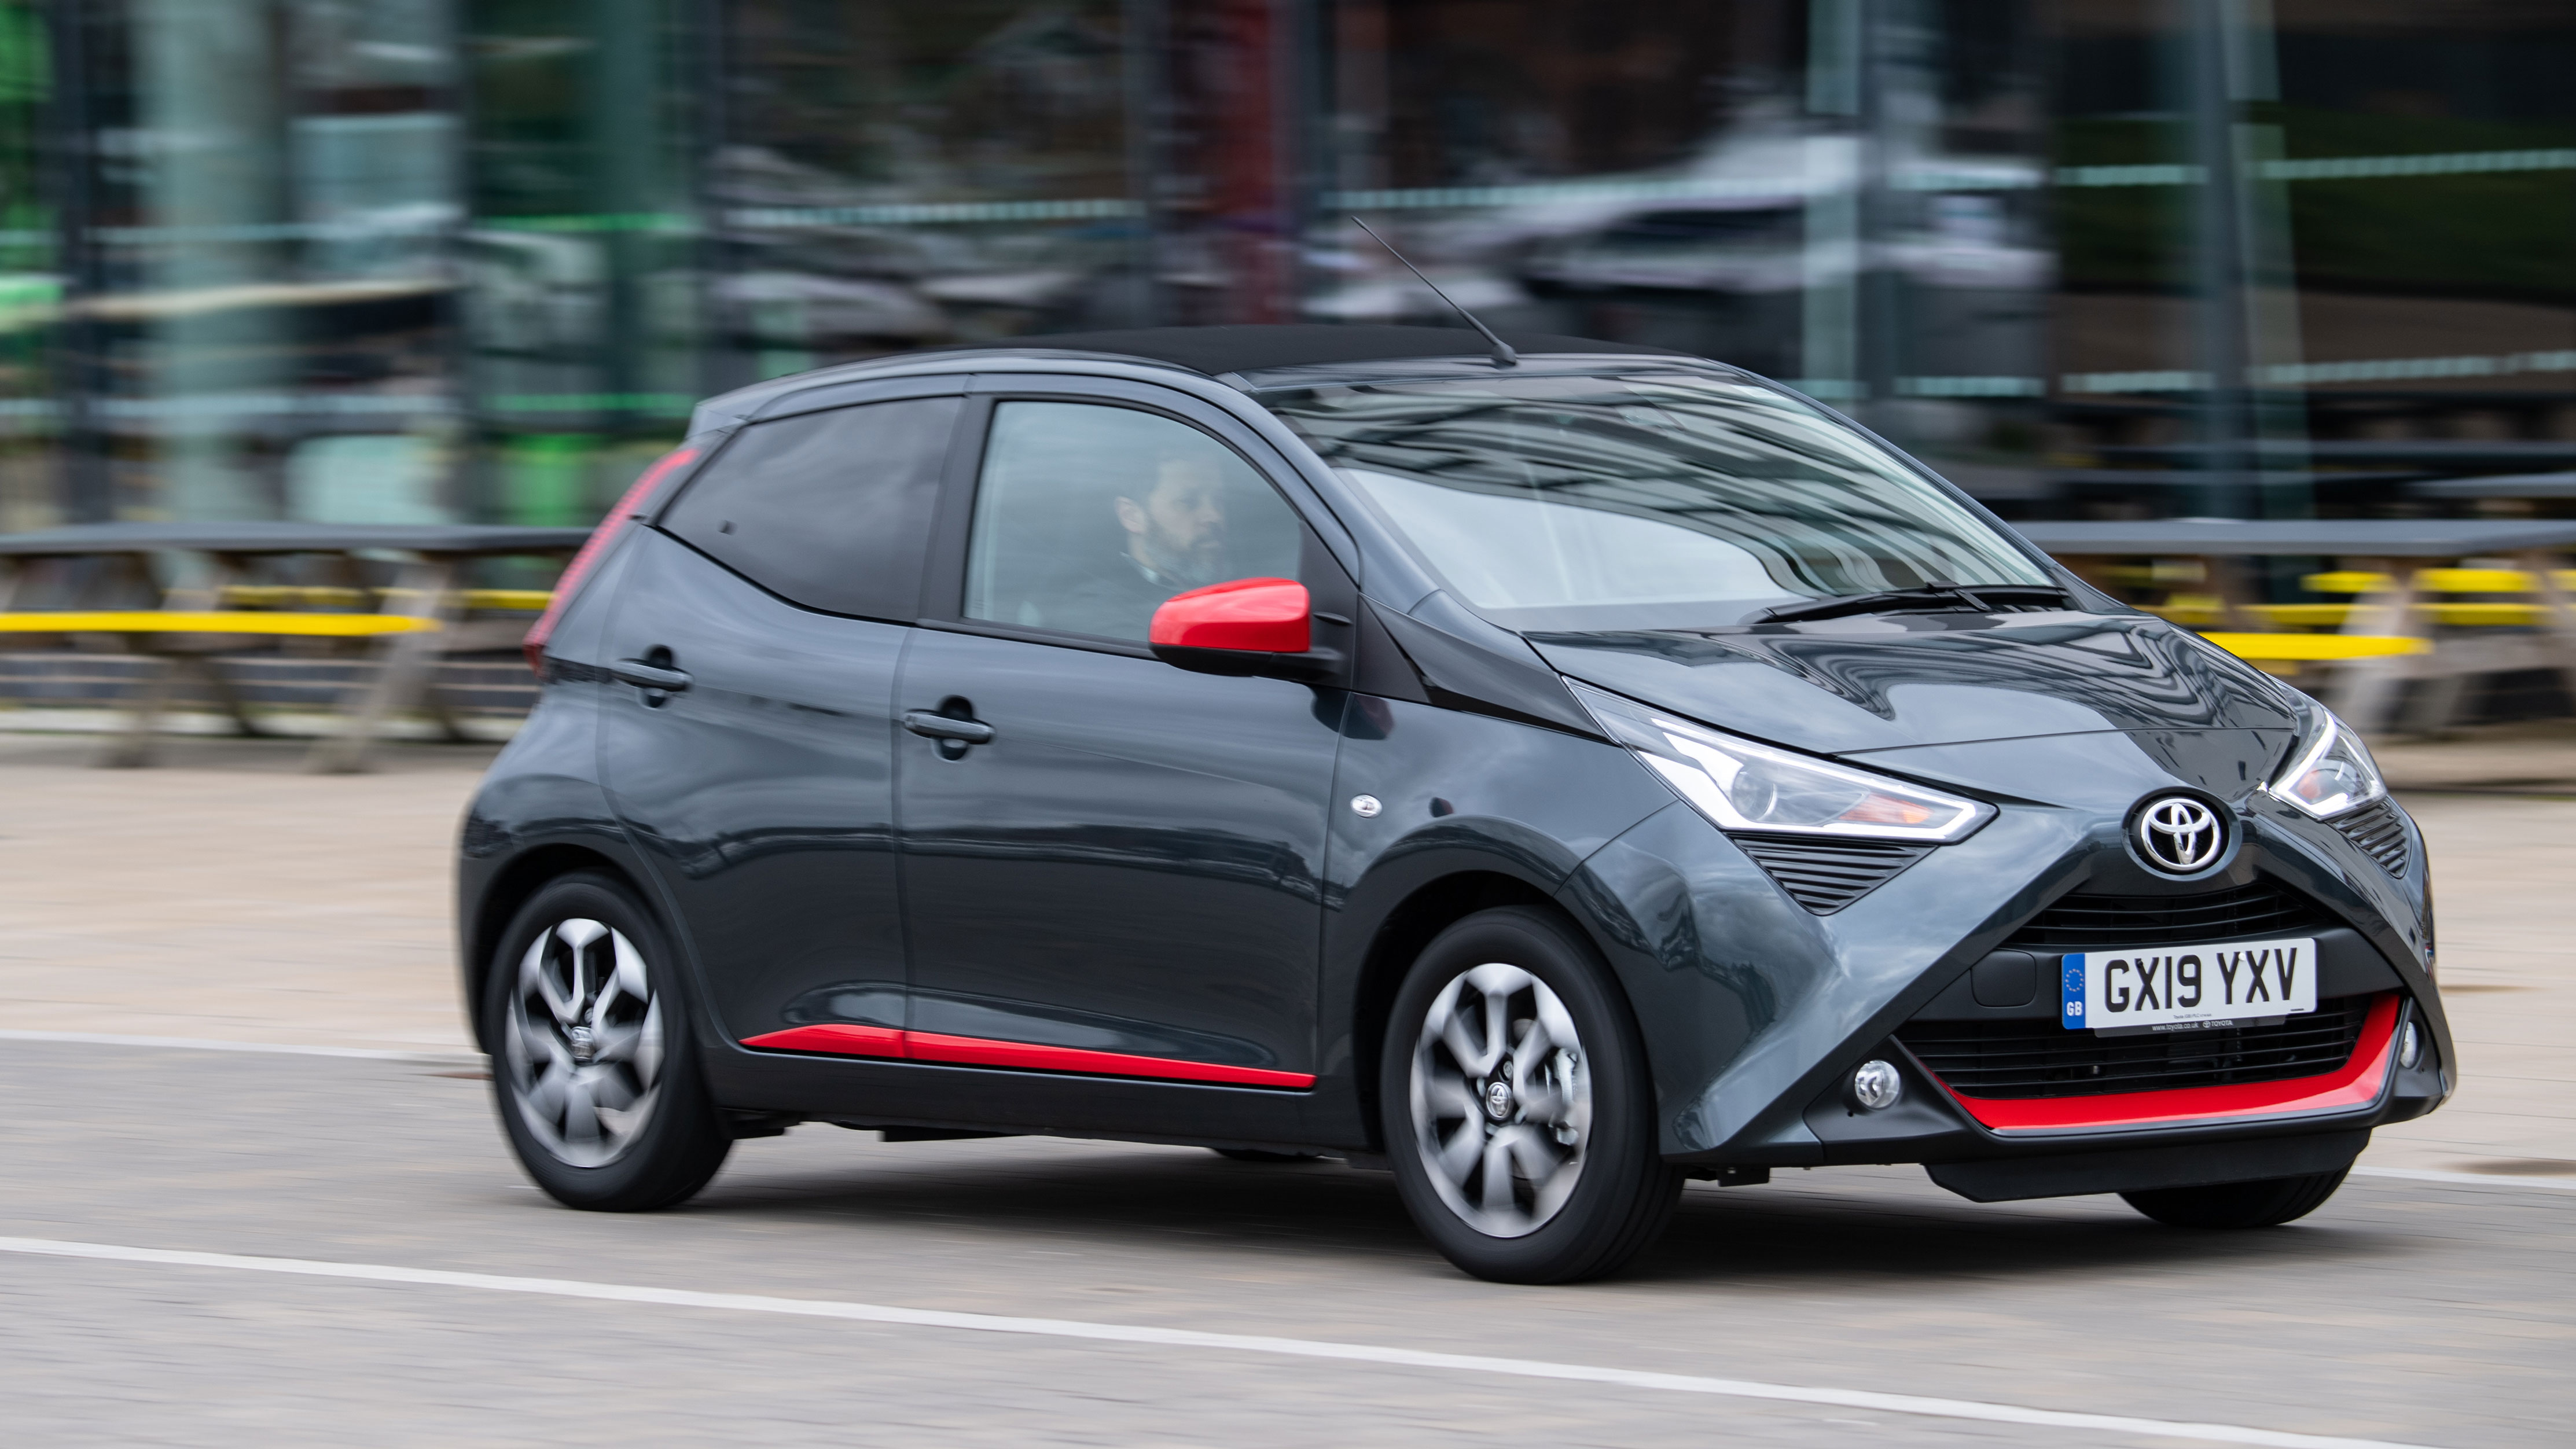 Used Toyota AYGO Cars For Sale | AutoTrader UK